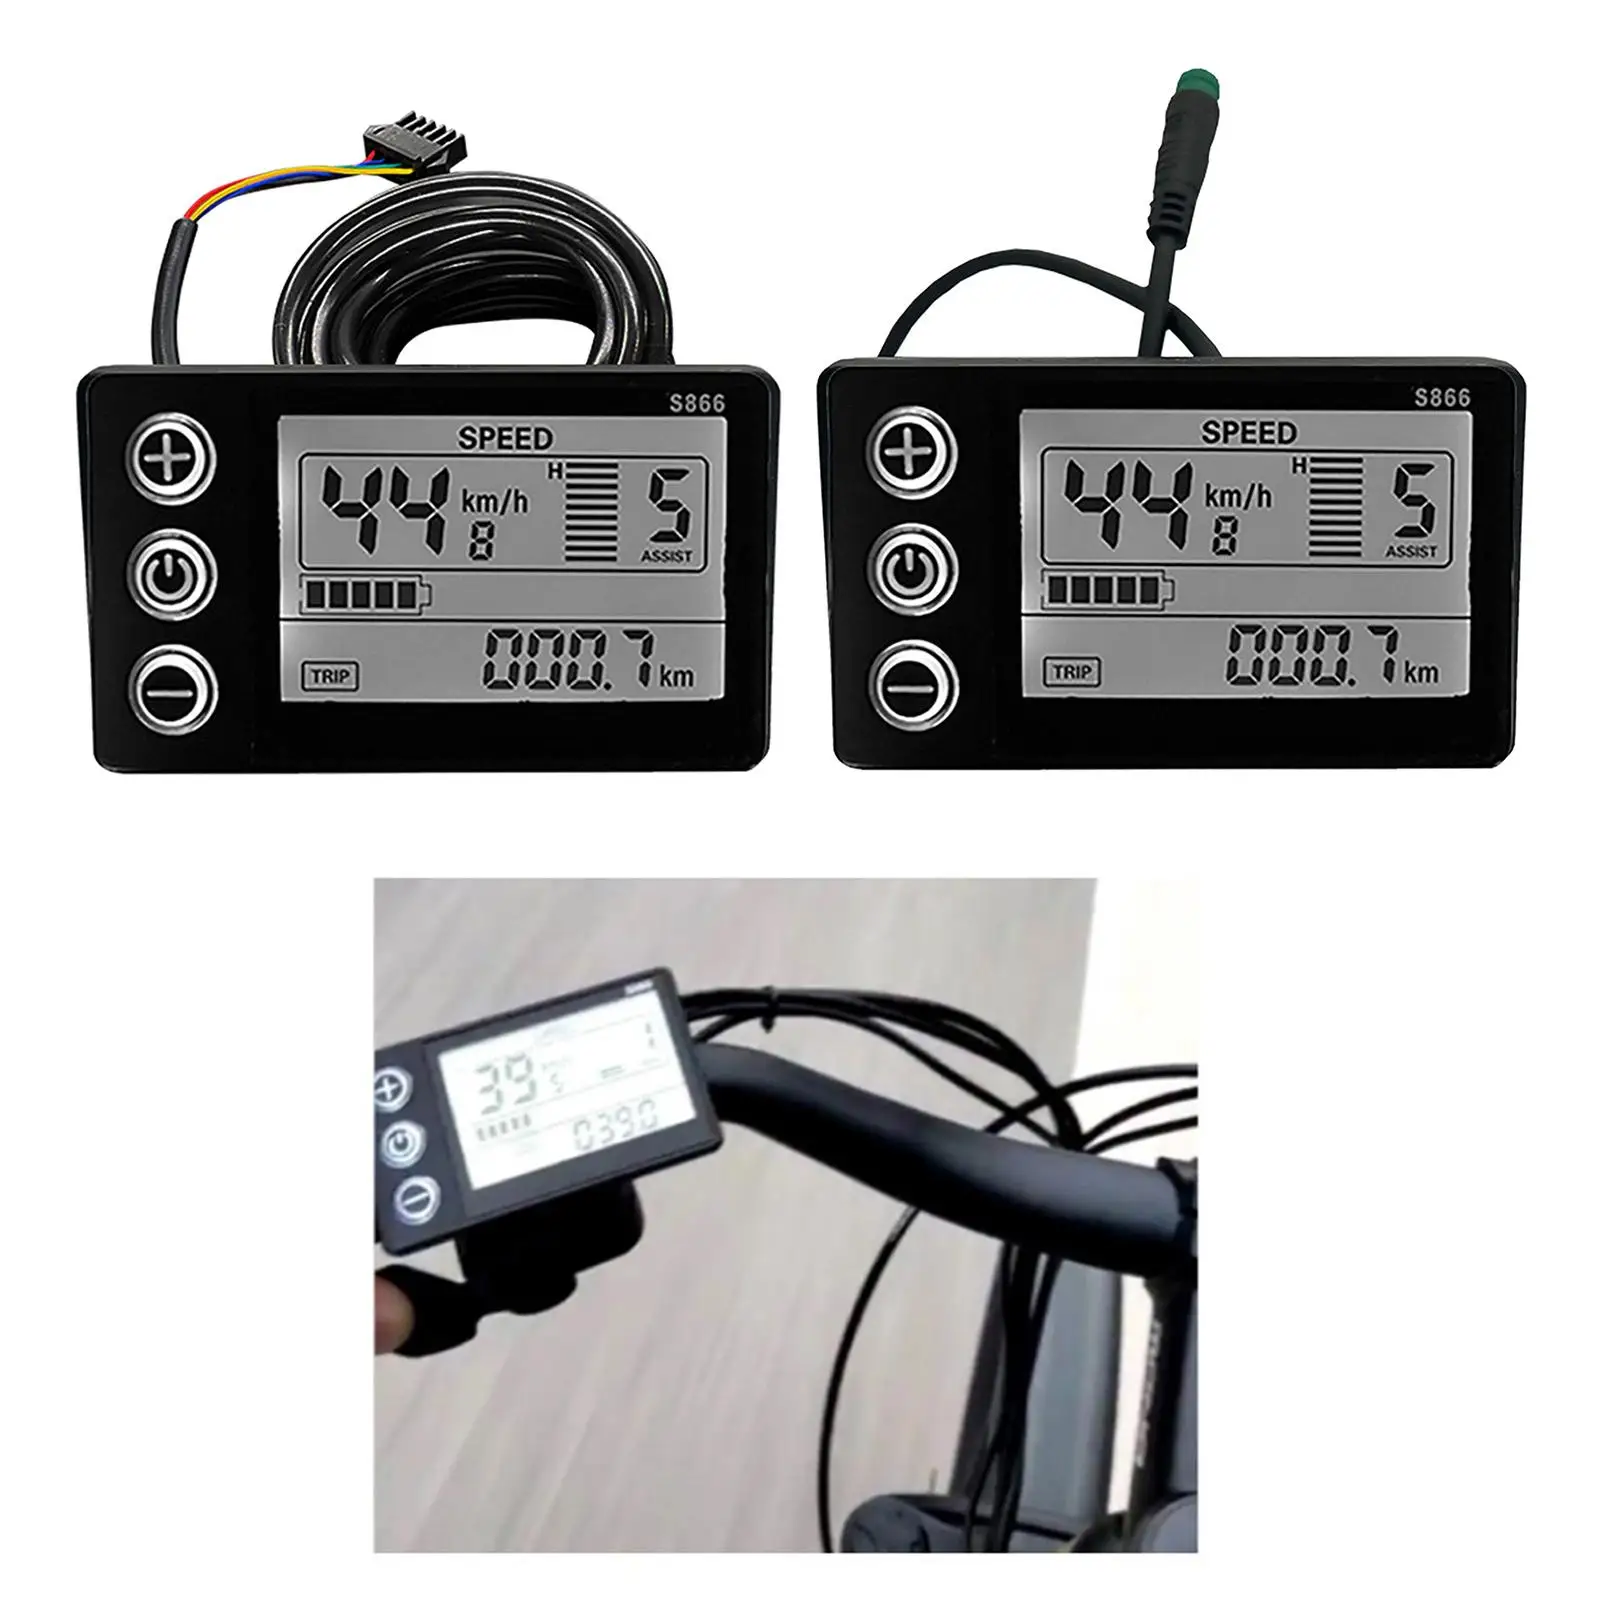 1x LCD S866 Display Panel Dashboard Throttle Accs Plastic for E-Bike Scooter